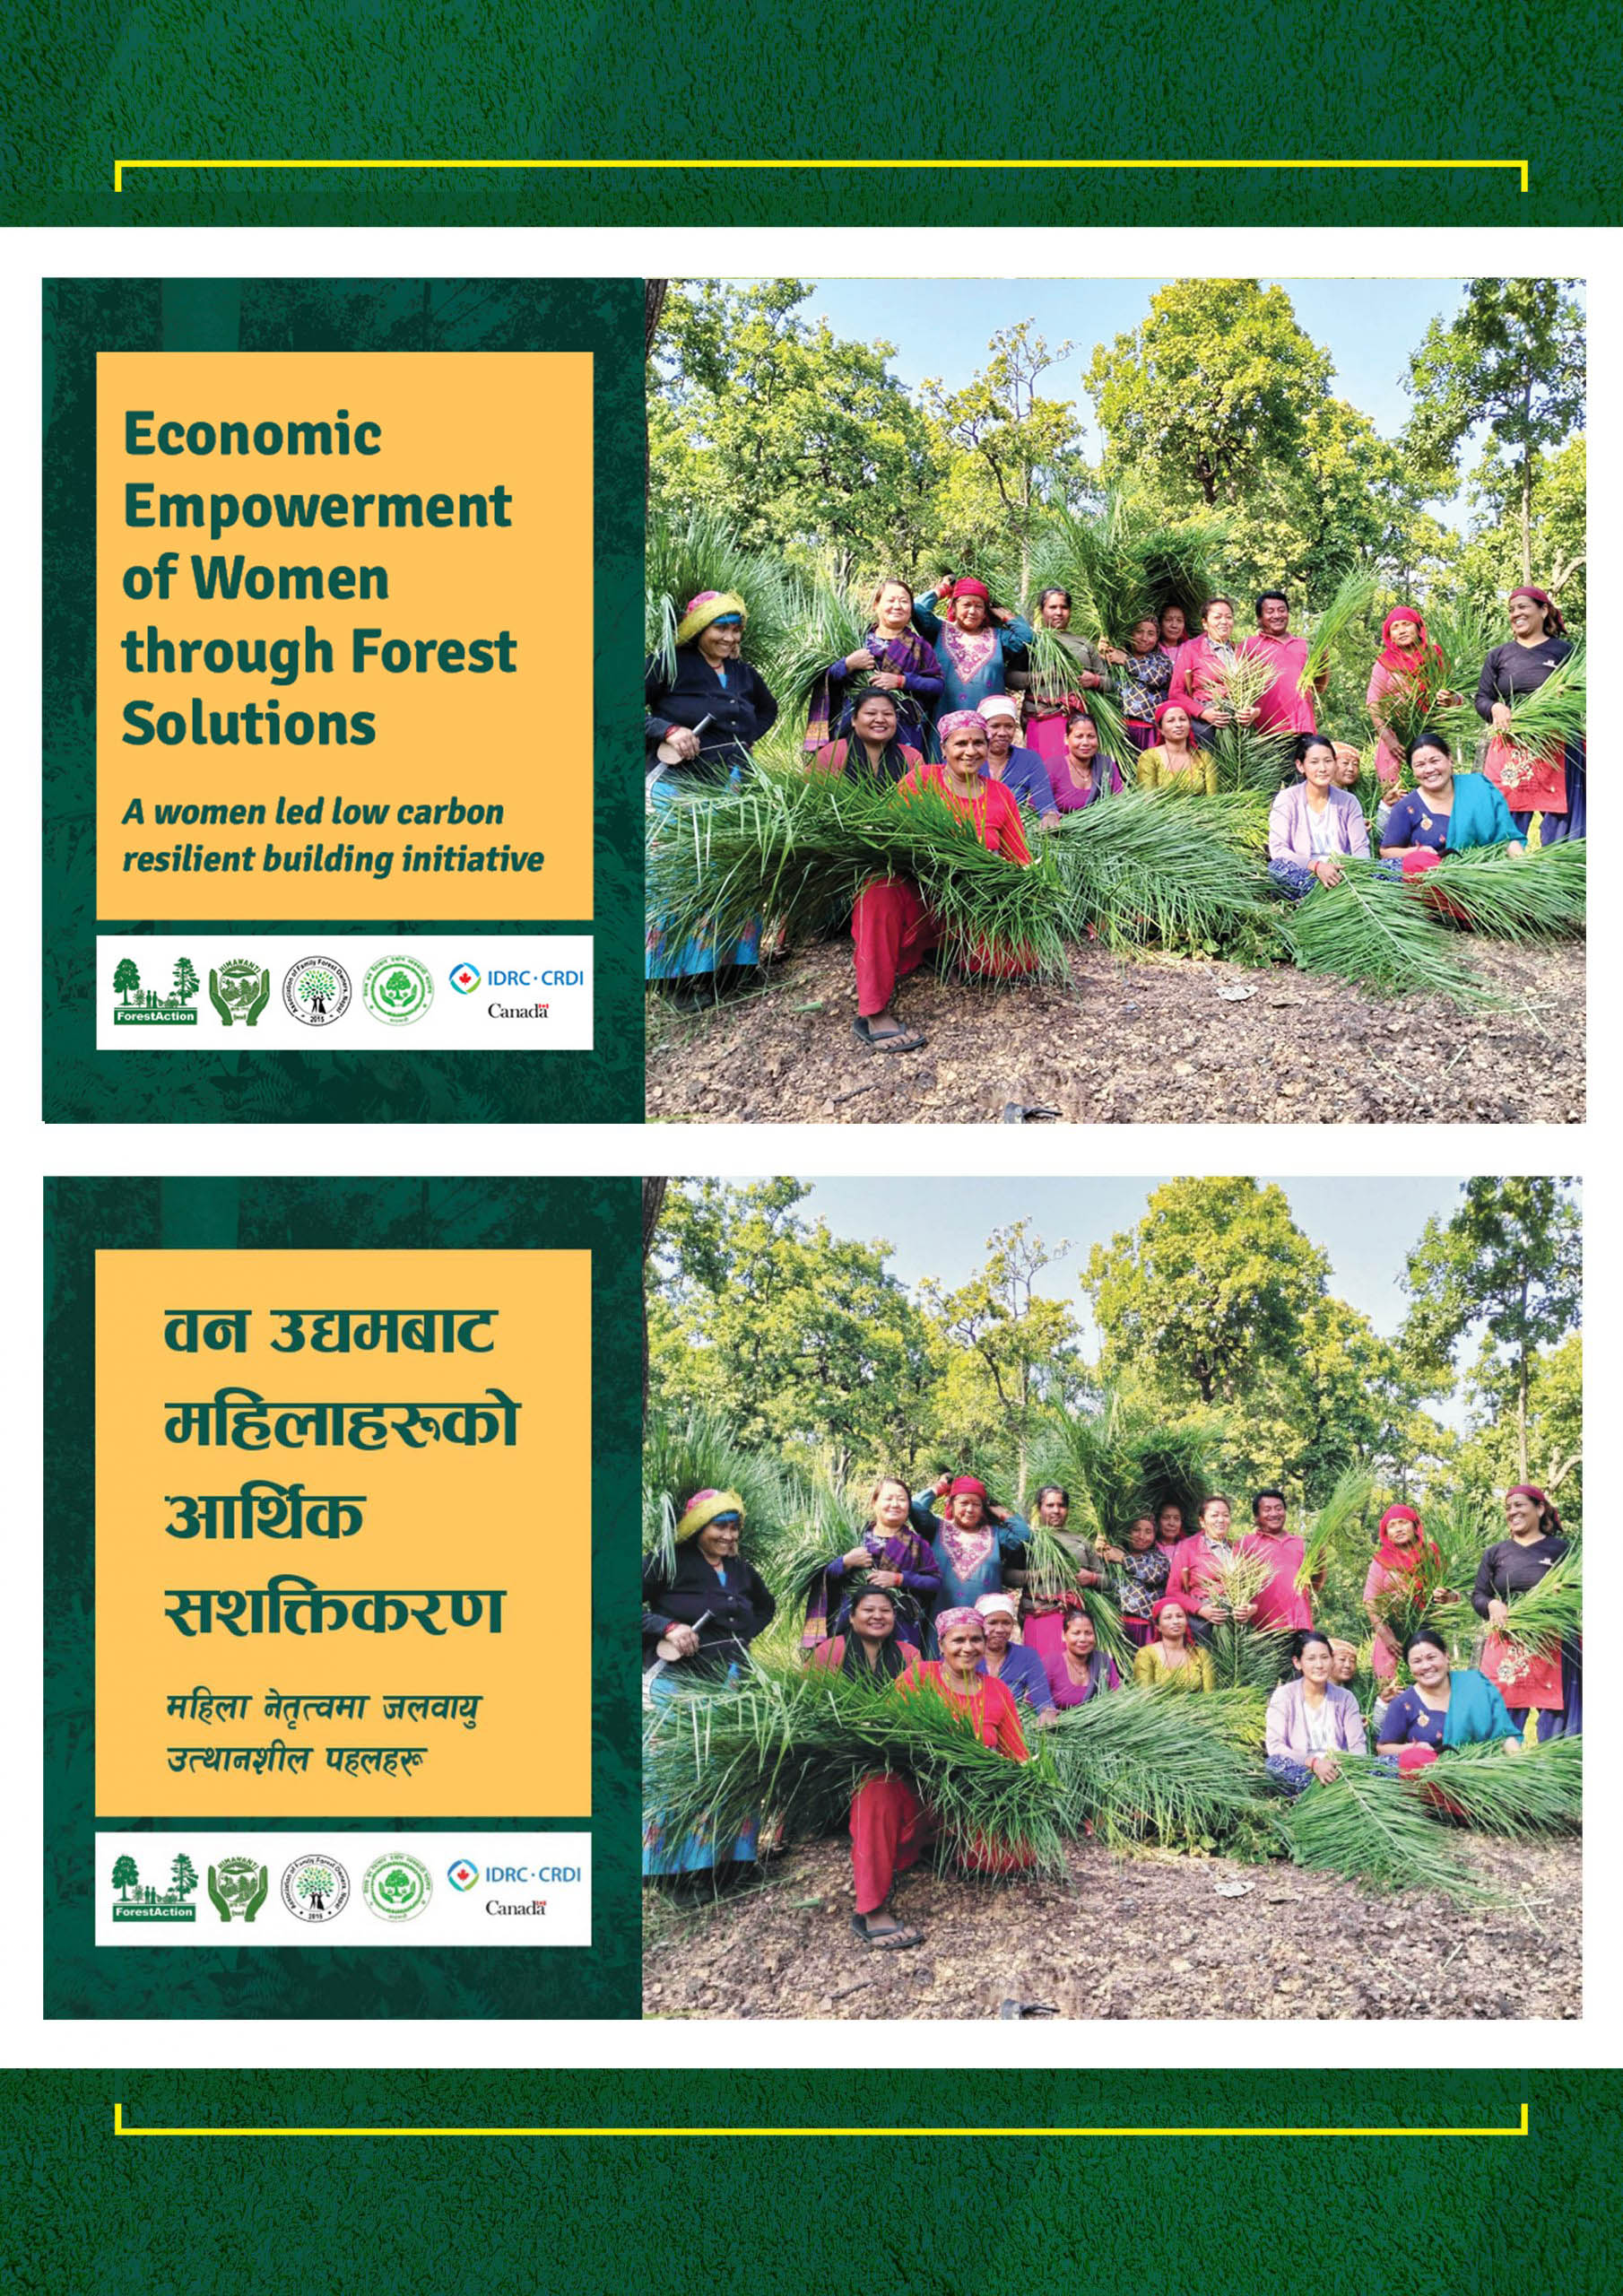 Economic Empowerment of Women through Forest Solutions